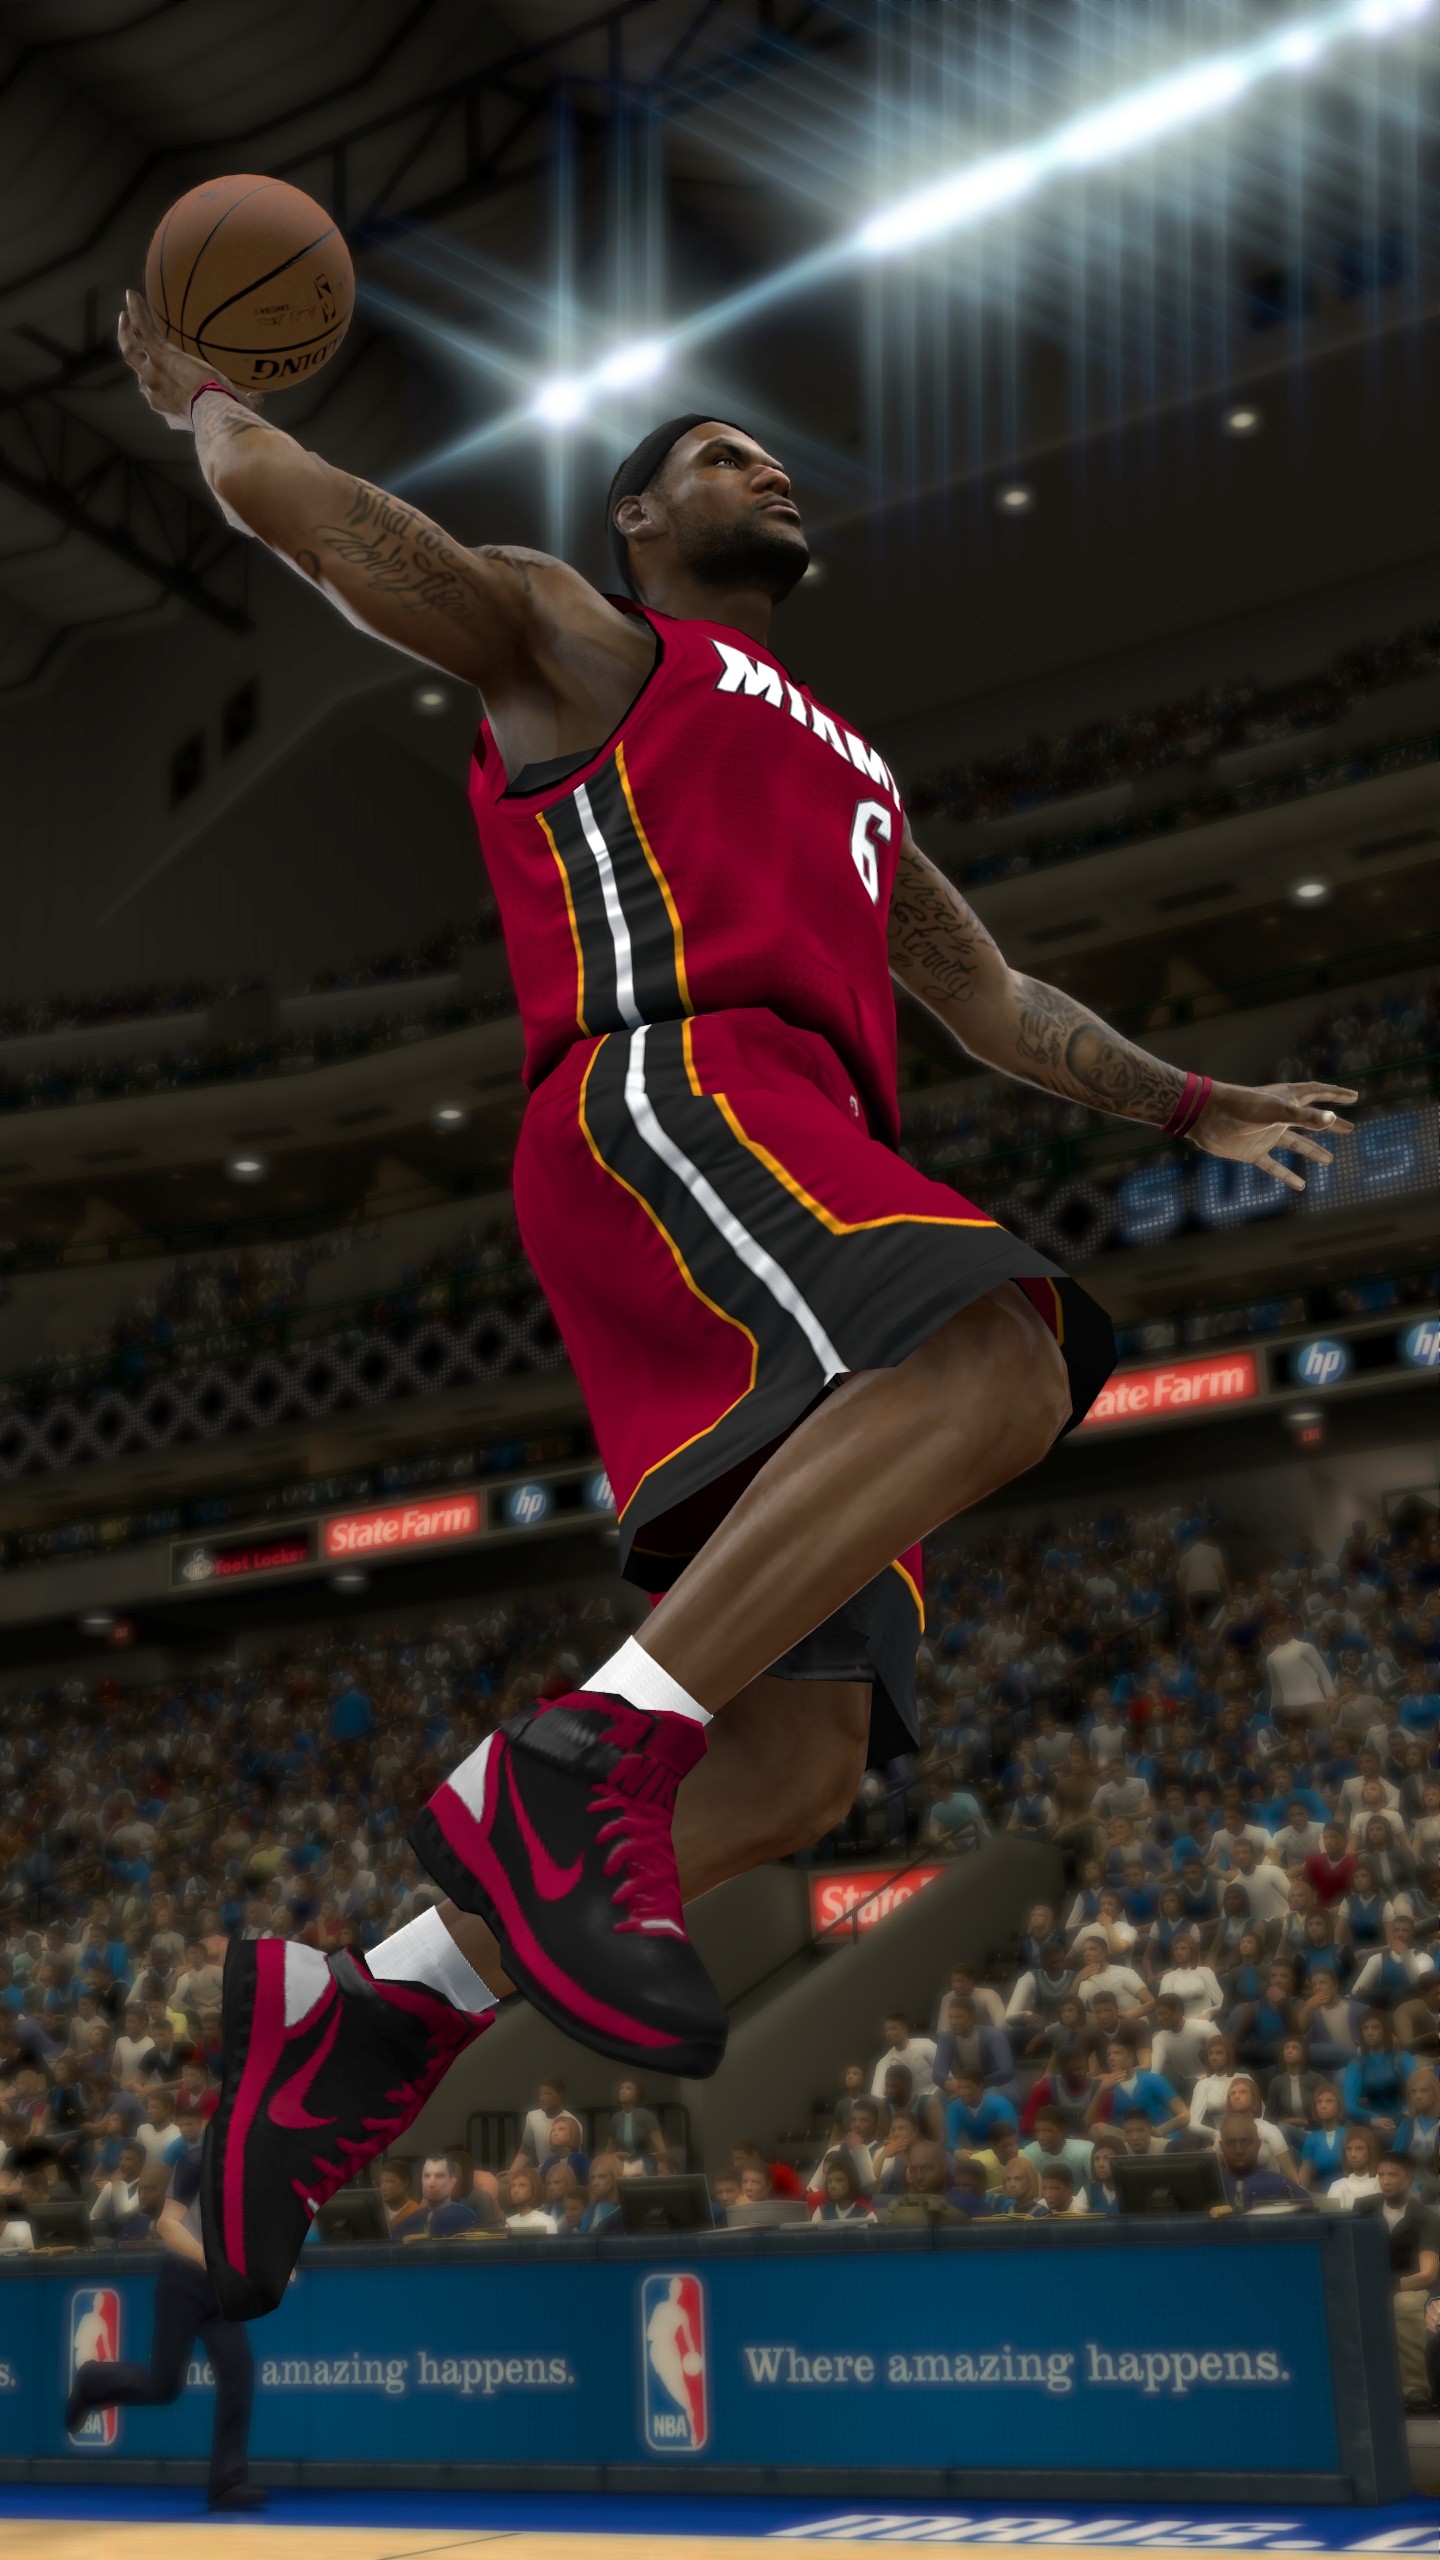 NBA 2K Wallpapers (81+ images)